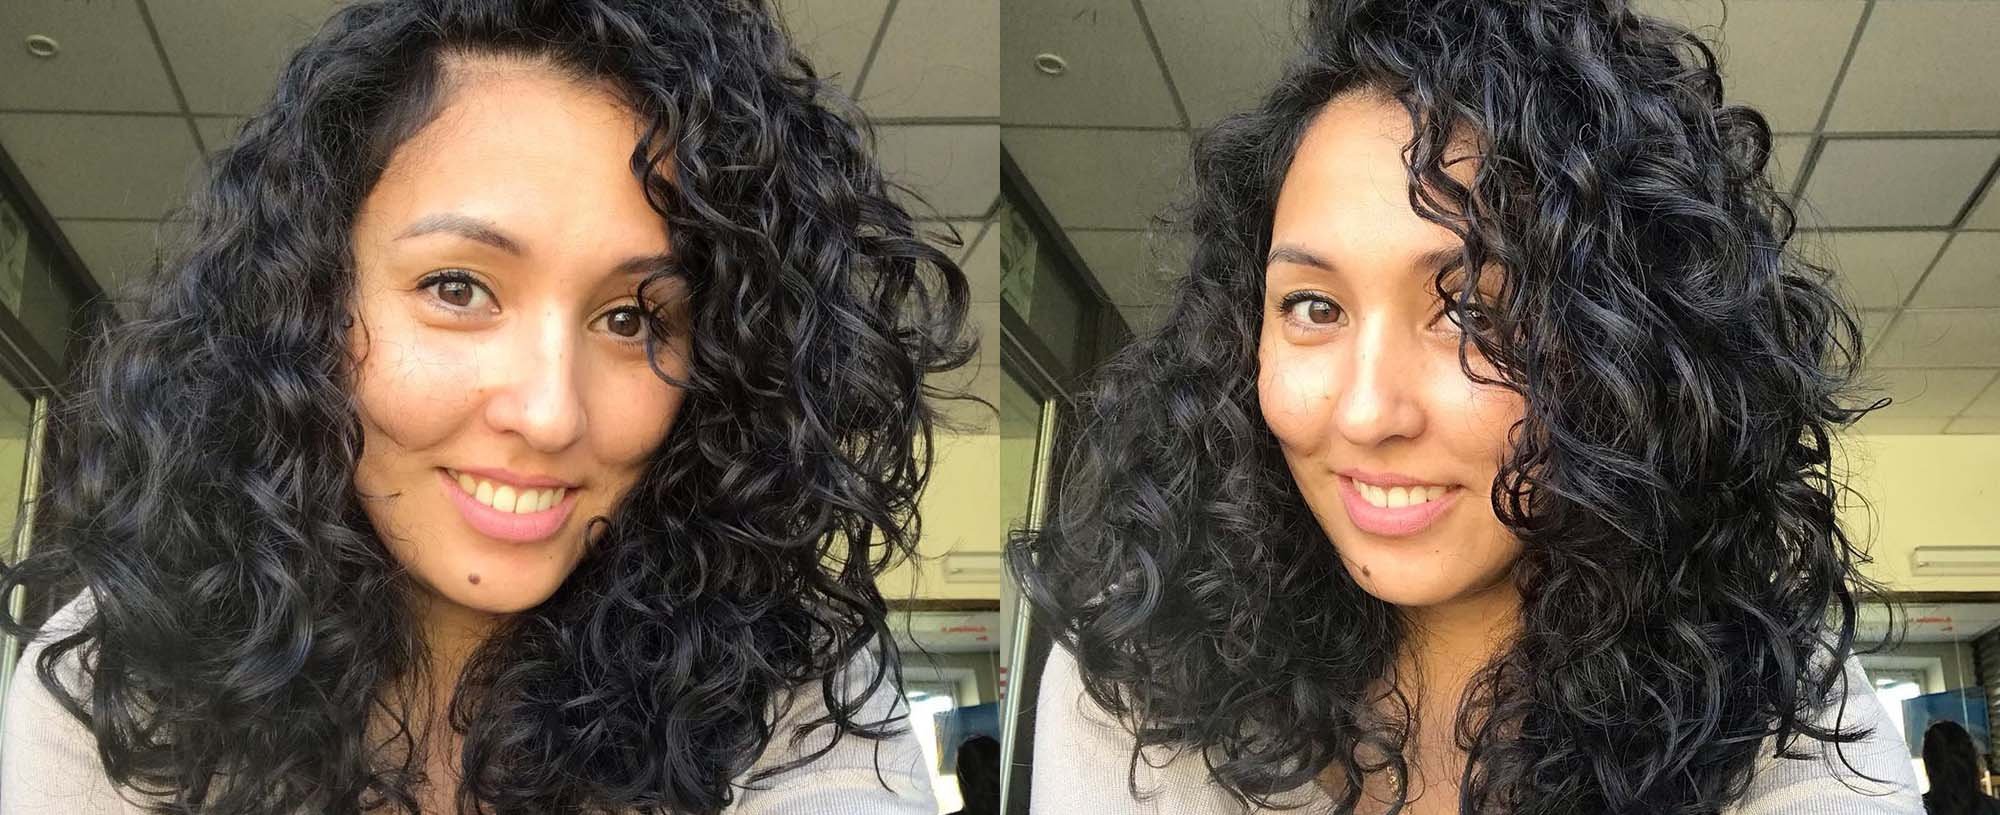 Have You Seen The Body Wave Perm Hairstyle Yet? If Not, You Have